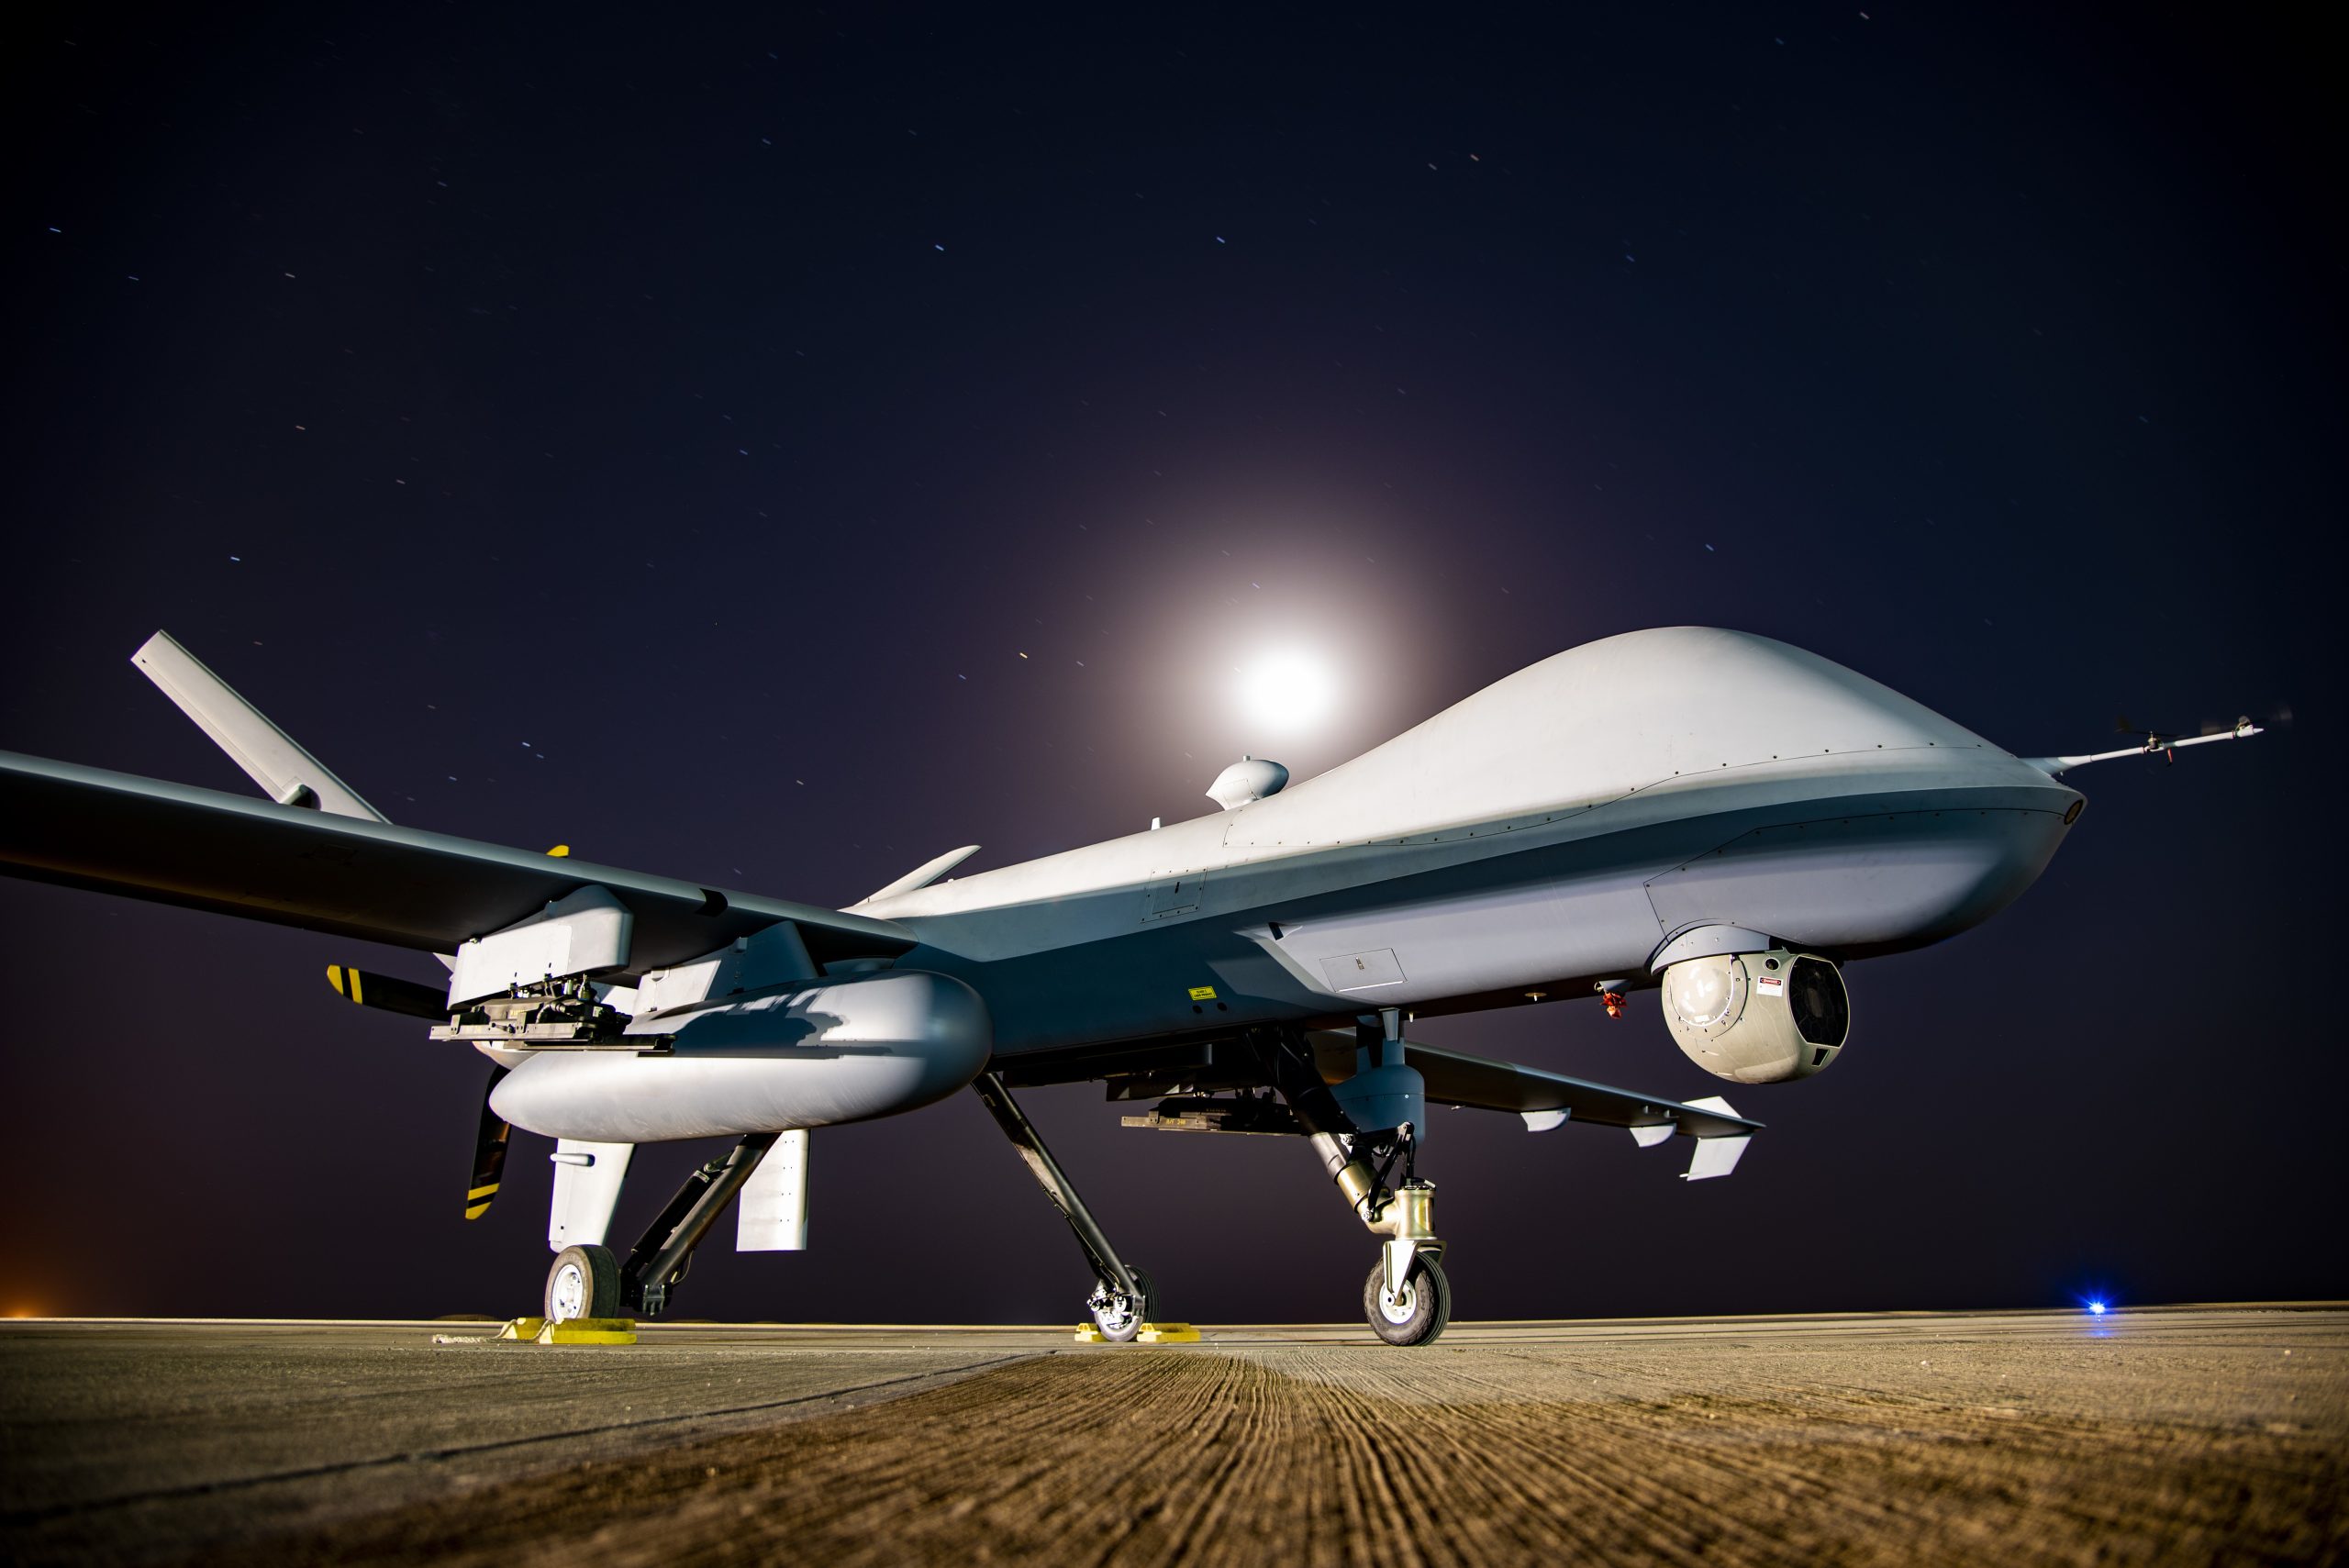 Ukrainian AI attack drones may be killing without human oversight